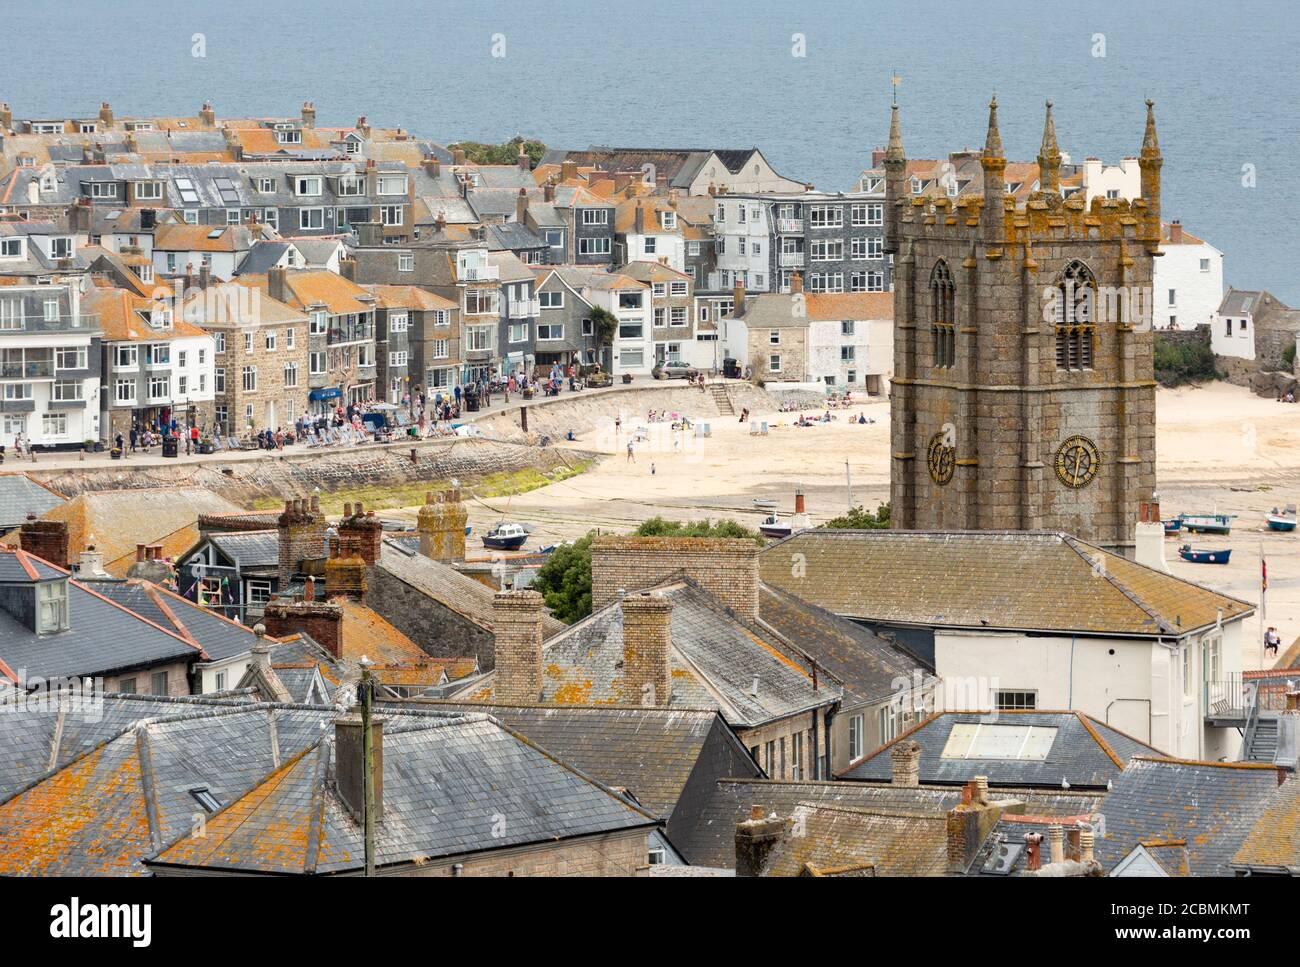 Townscape view of St Ives showing St Ives Parish Church, Cornwall, England Stock Photo